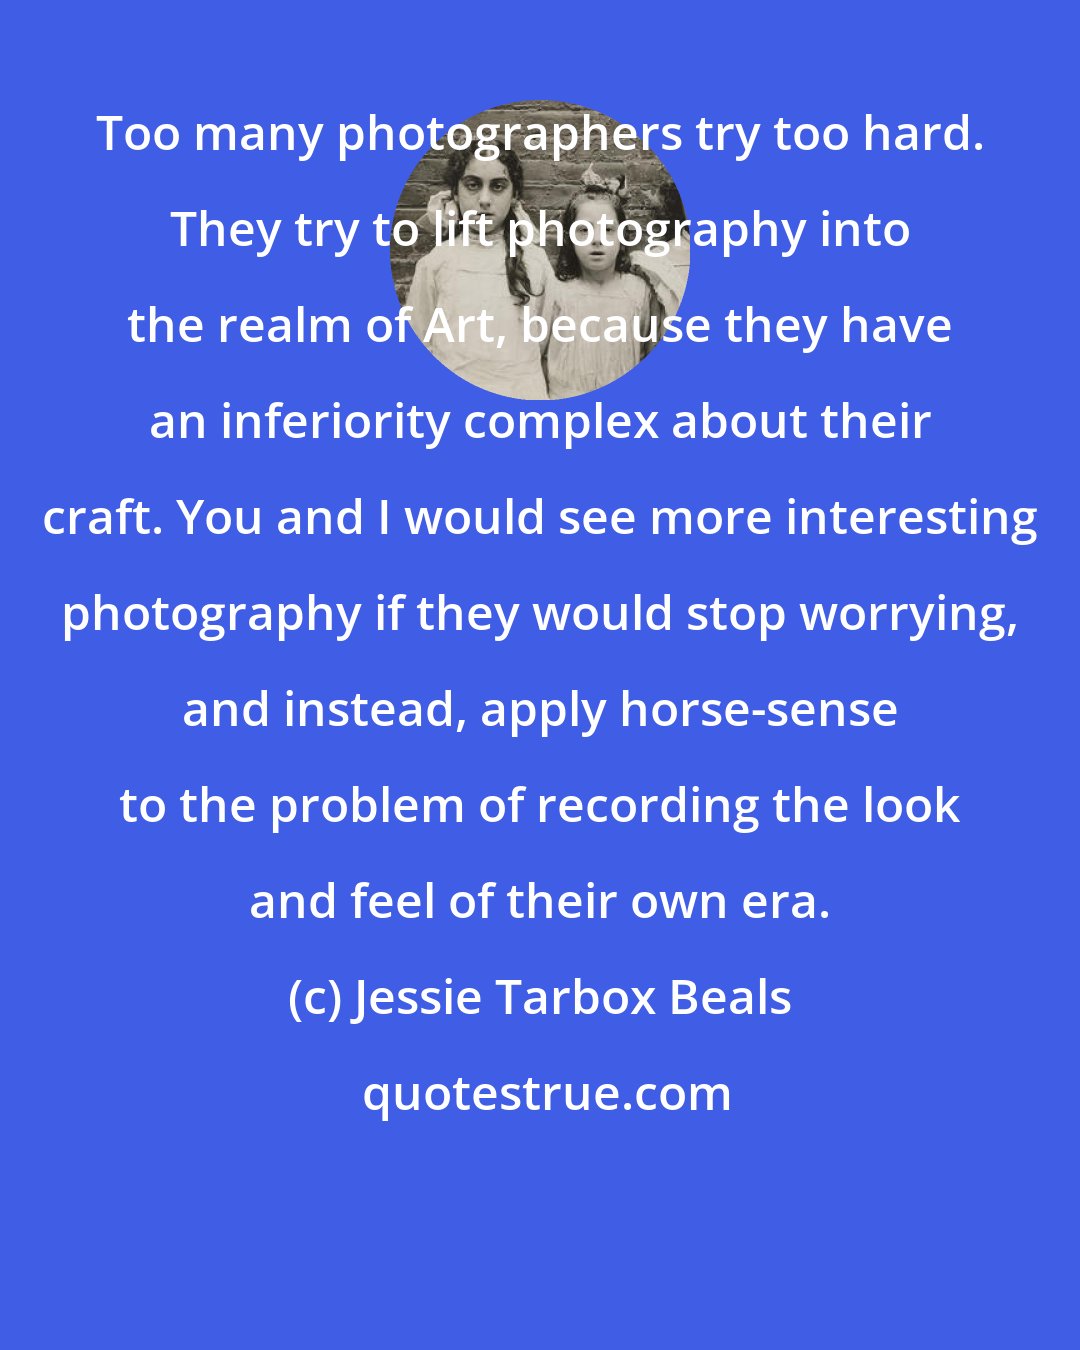 Jessie Tarbox Beals: Too many photographers try too hard. They try to lift photography into the realm of Art, because they have an inferiority complex about their craft. You and I would see more interesting photography if they would stop worrying, and instead, apply horse-sense to the problem of recording the look and feel of their own era.